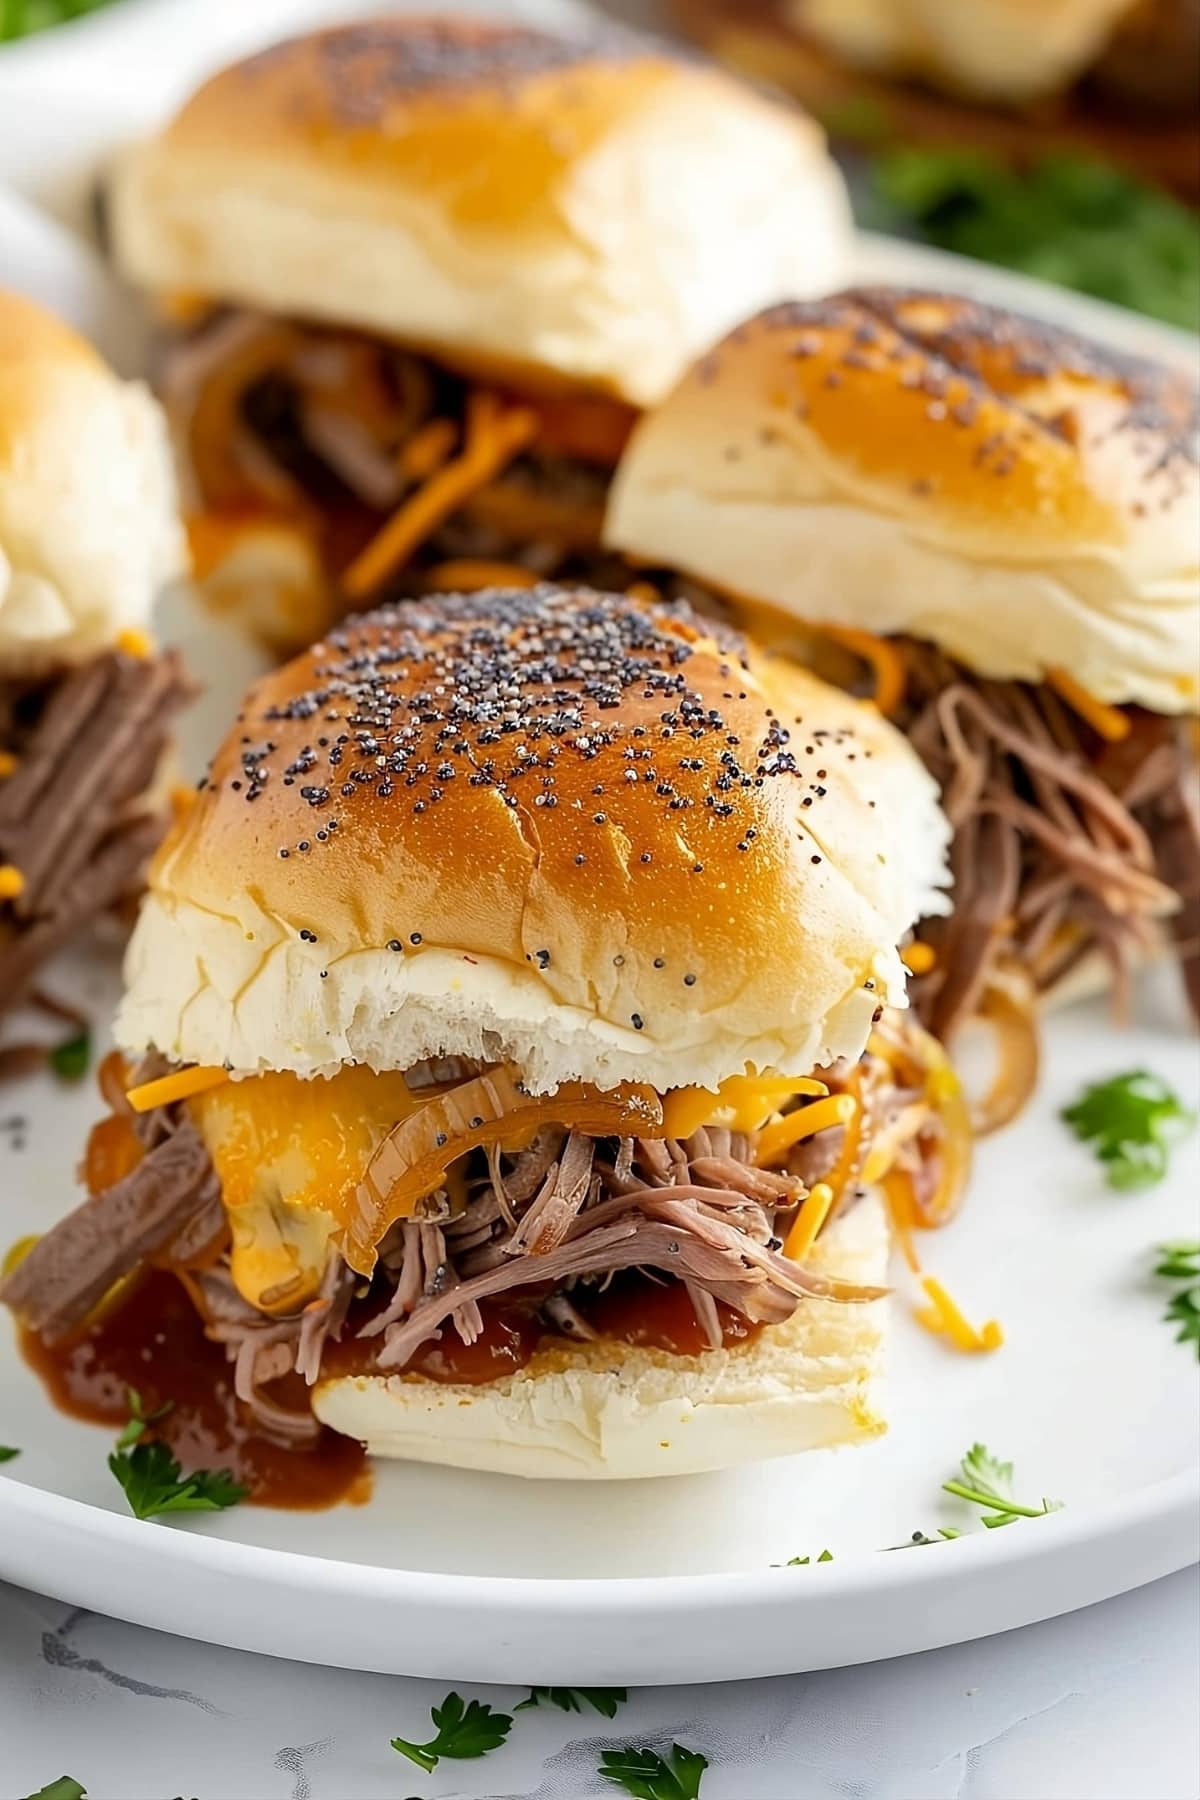 Beef and cheese sliders with poppy seeds on top served on a white plate.